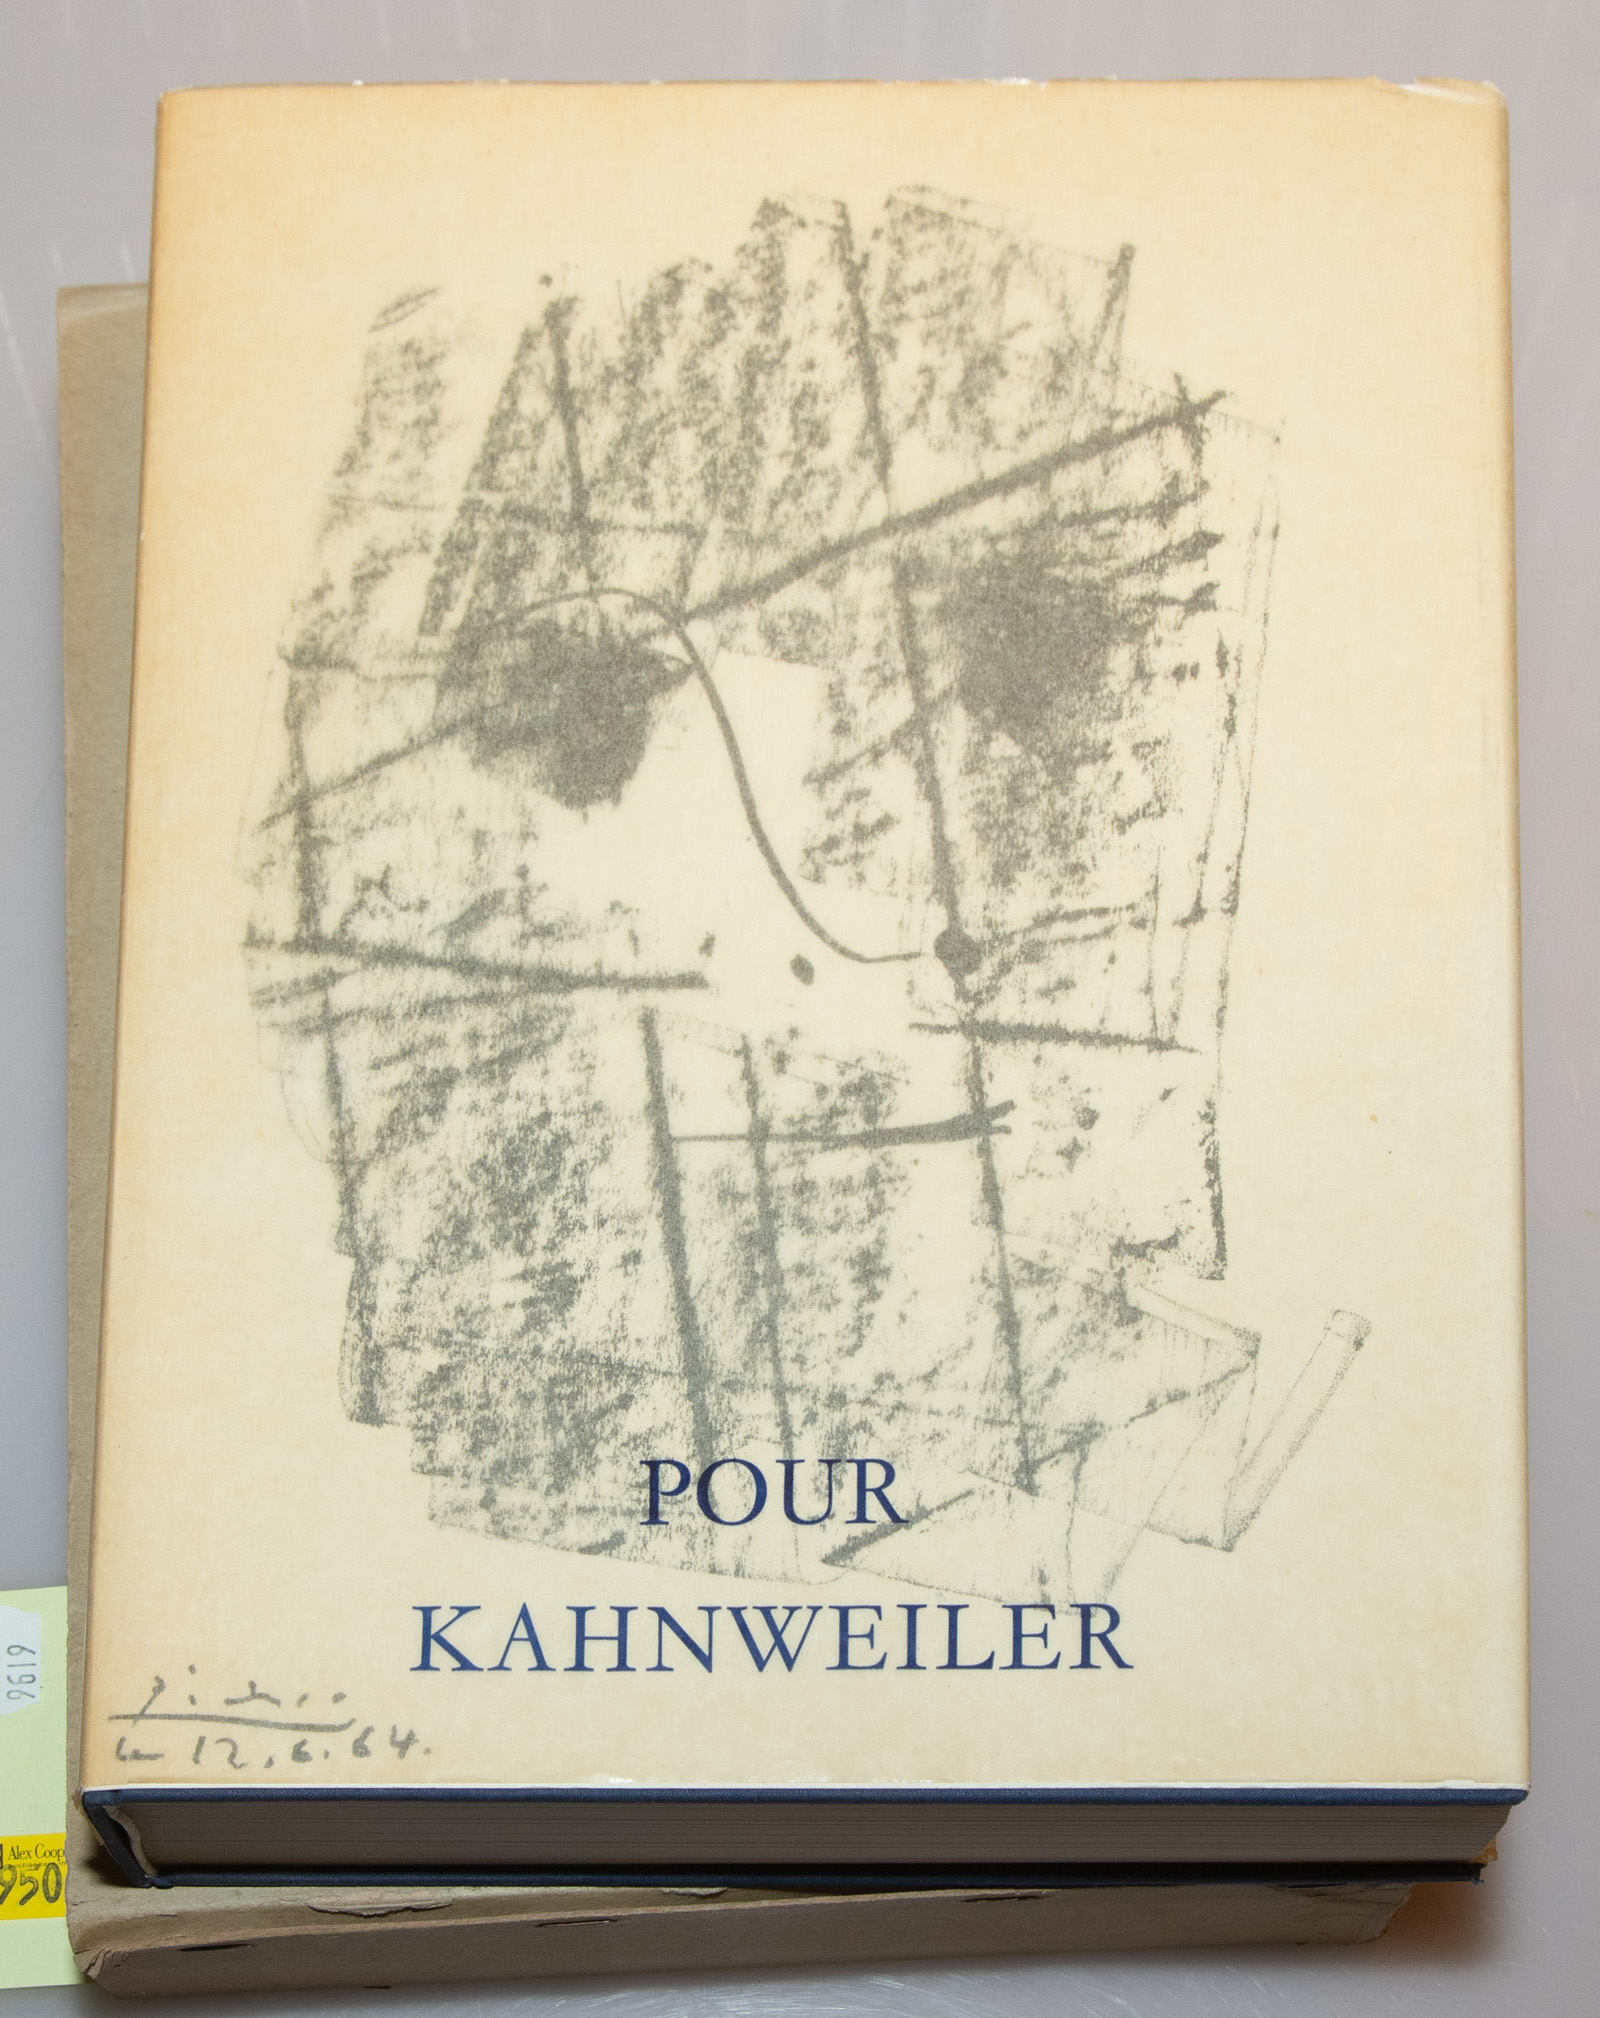 ARTISTS BOOK, TRIBUTE TO KAHNWEILER